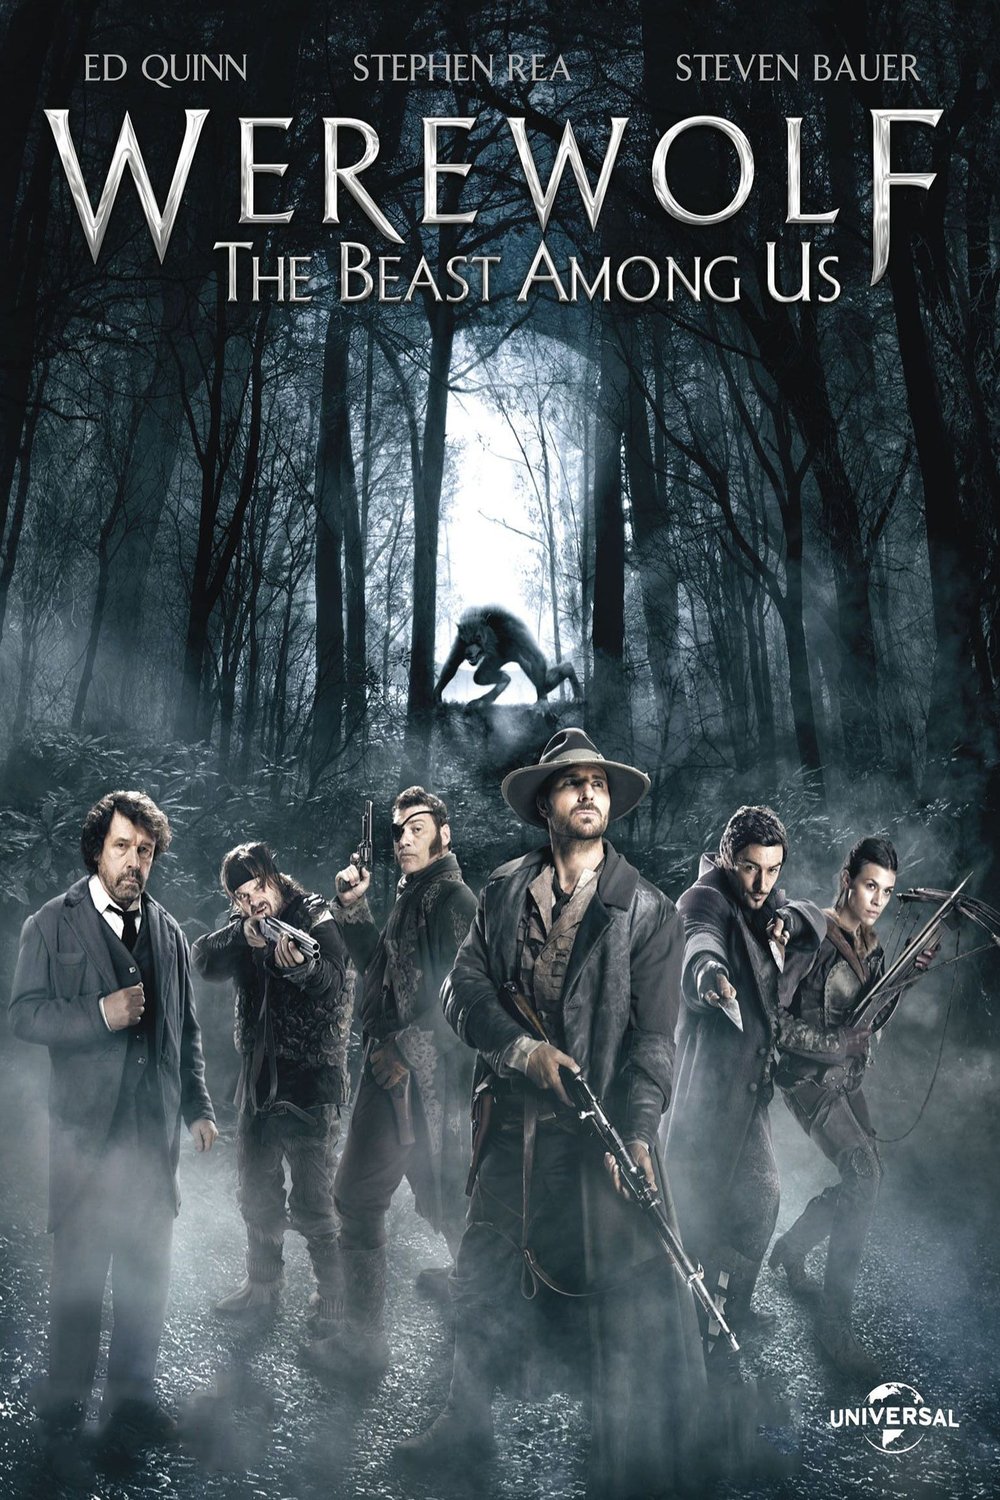 Poster of the movie Werewolf: The Beast Among Us